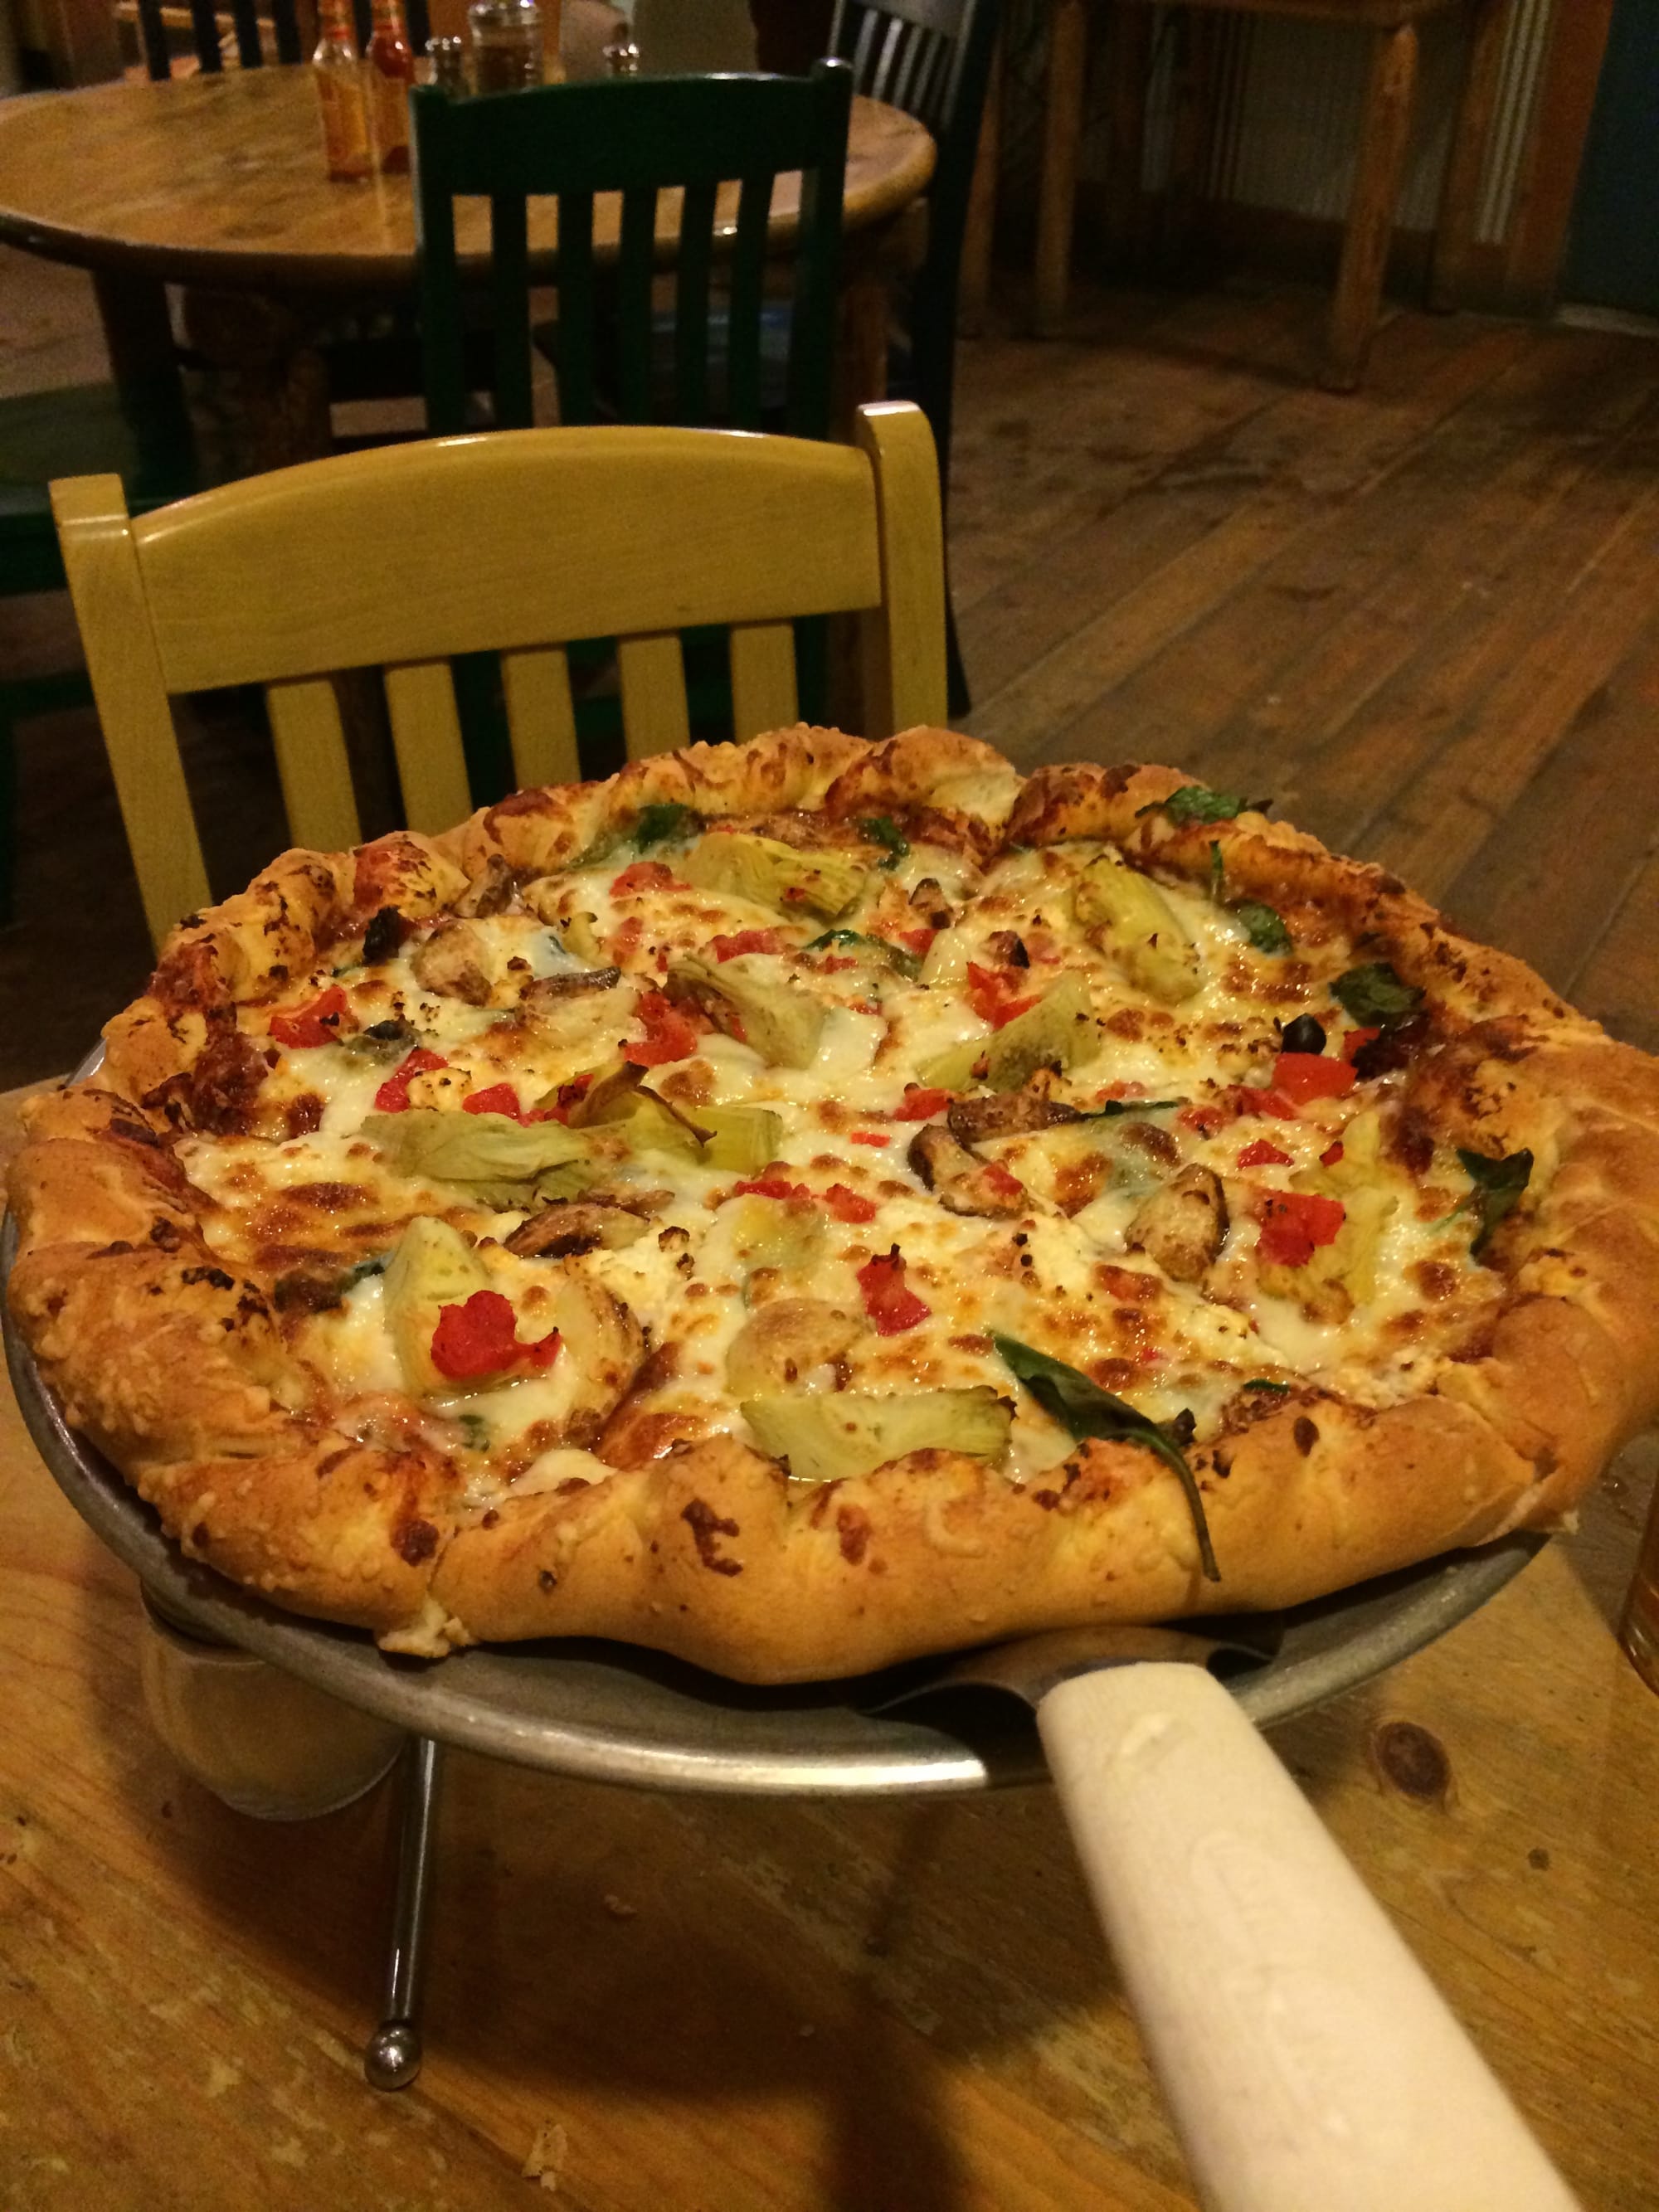 Photo by Author — pizza at the Blue Moon Bakery, Big Sky, Montana